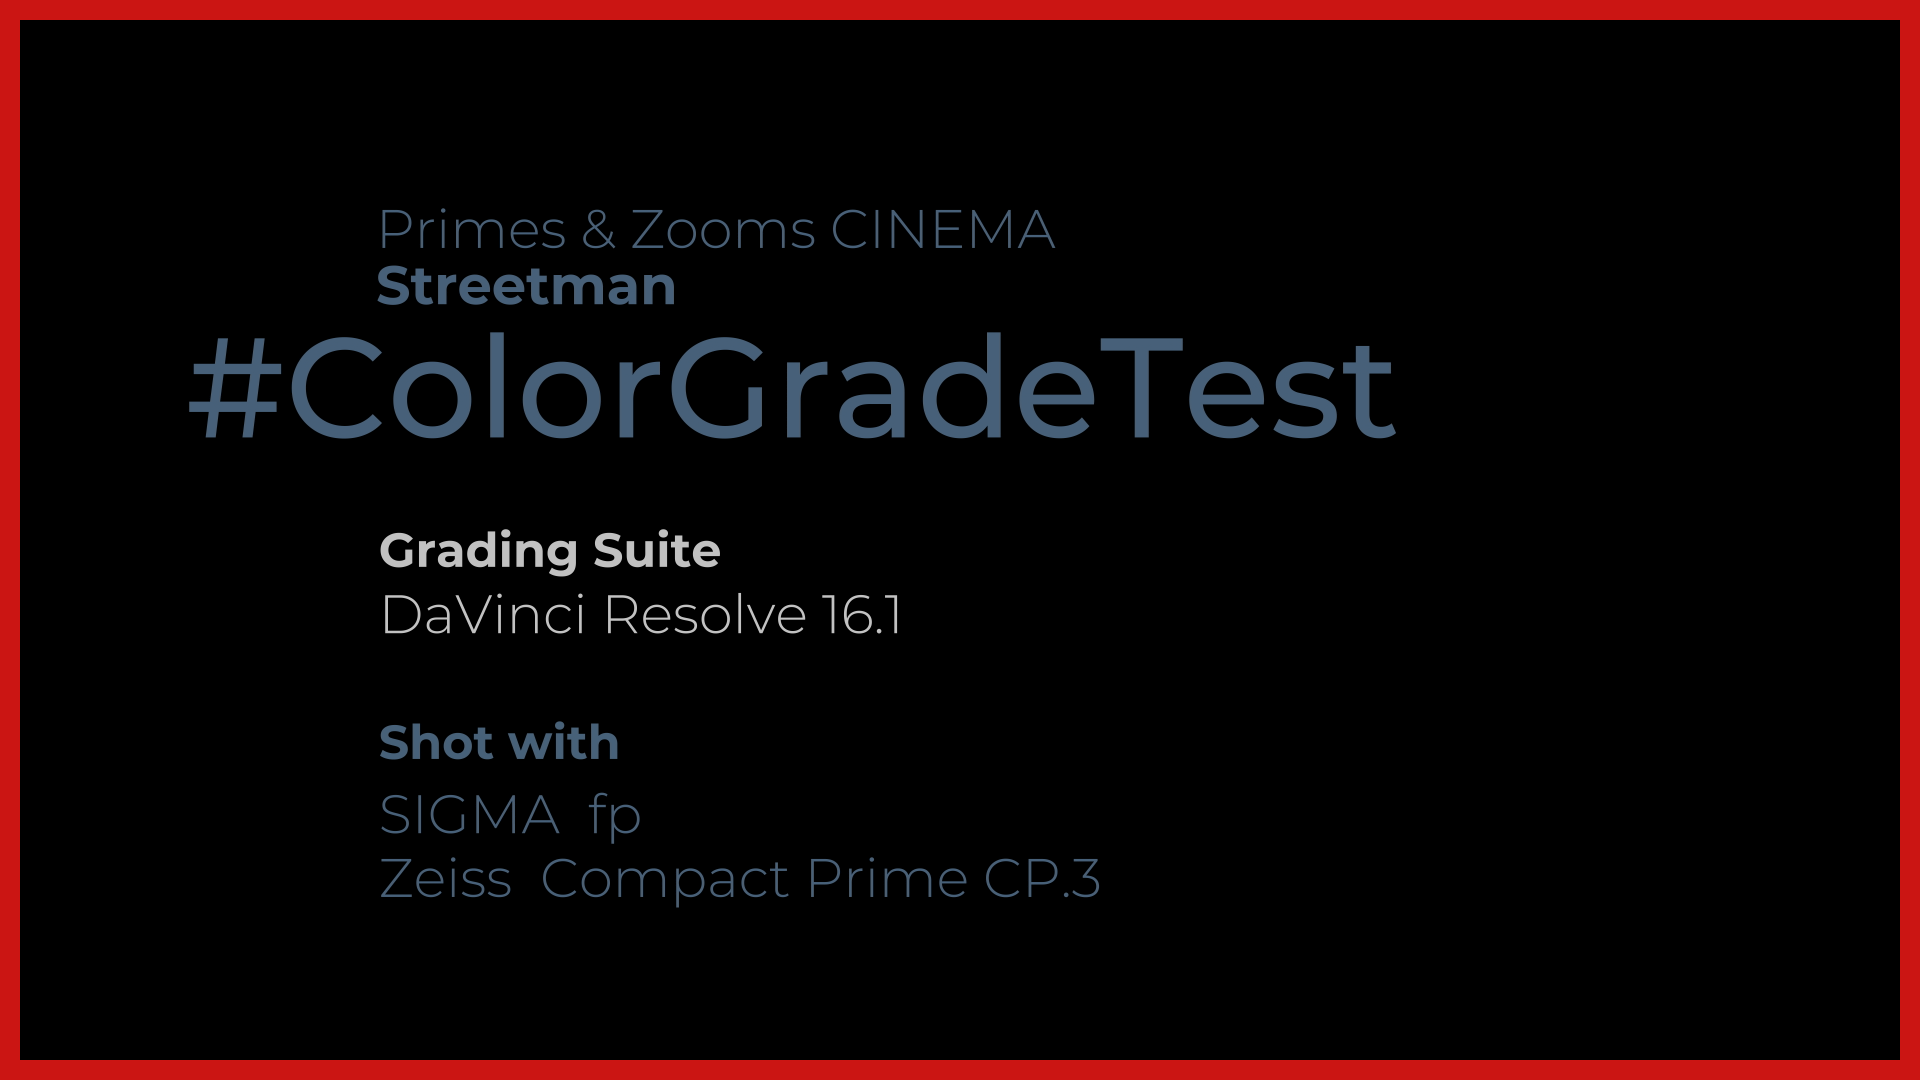 Primes and zooms Grade Test: street man